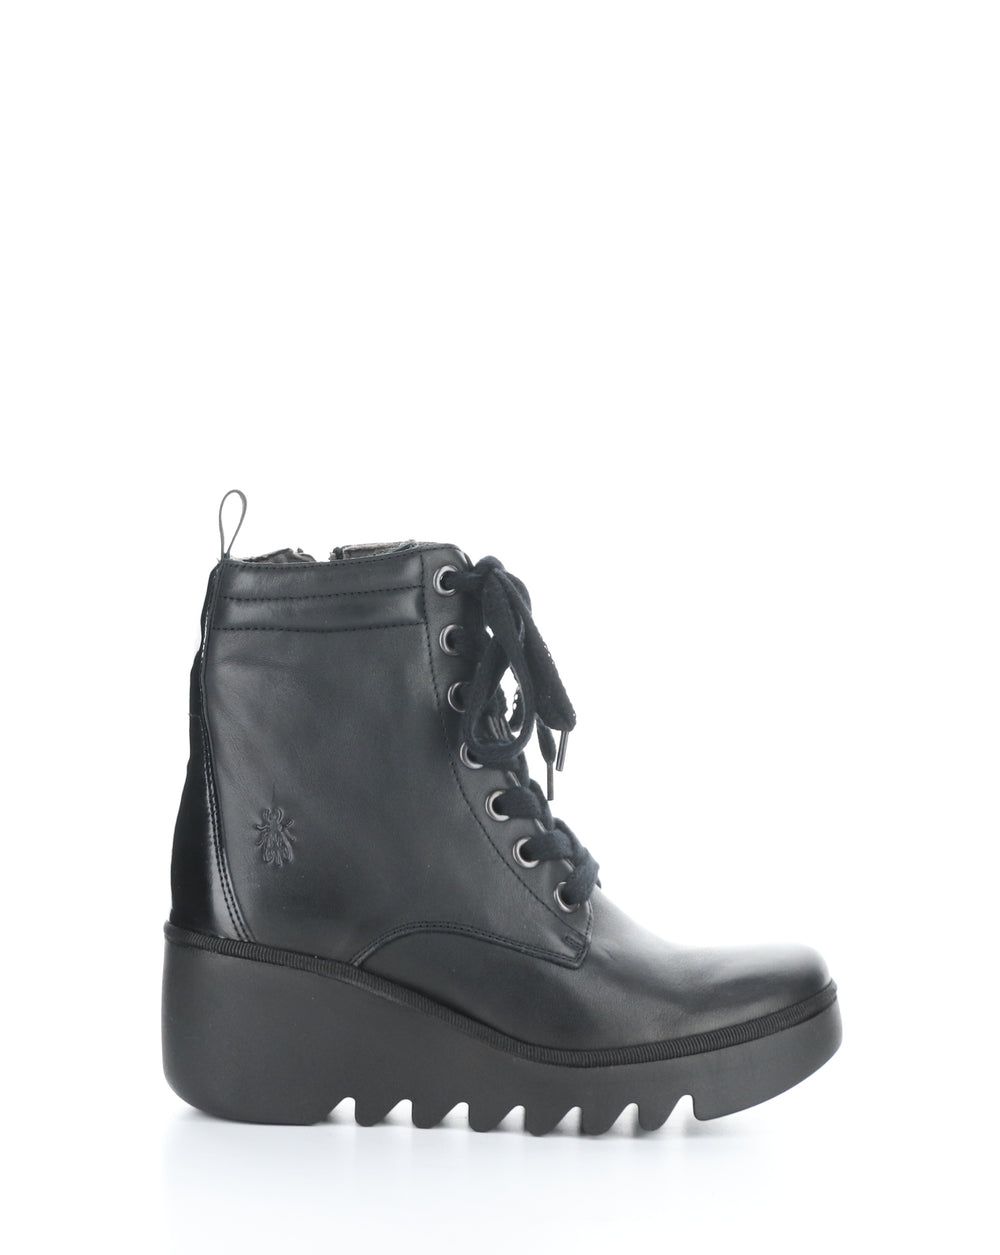 BIAZ329FLY 011 BLACK Lace-up Boots